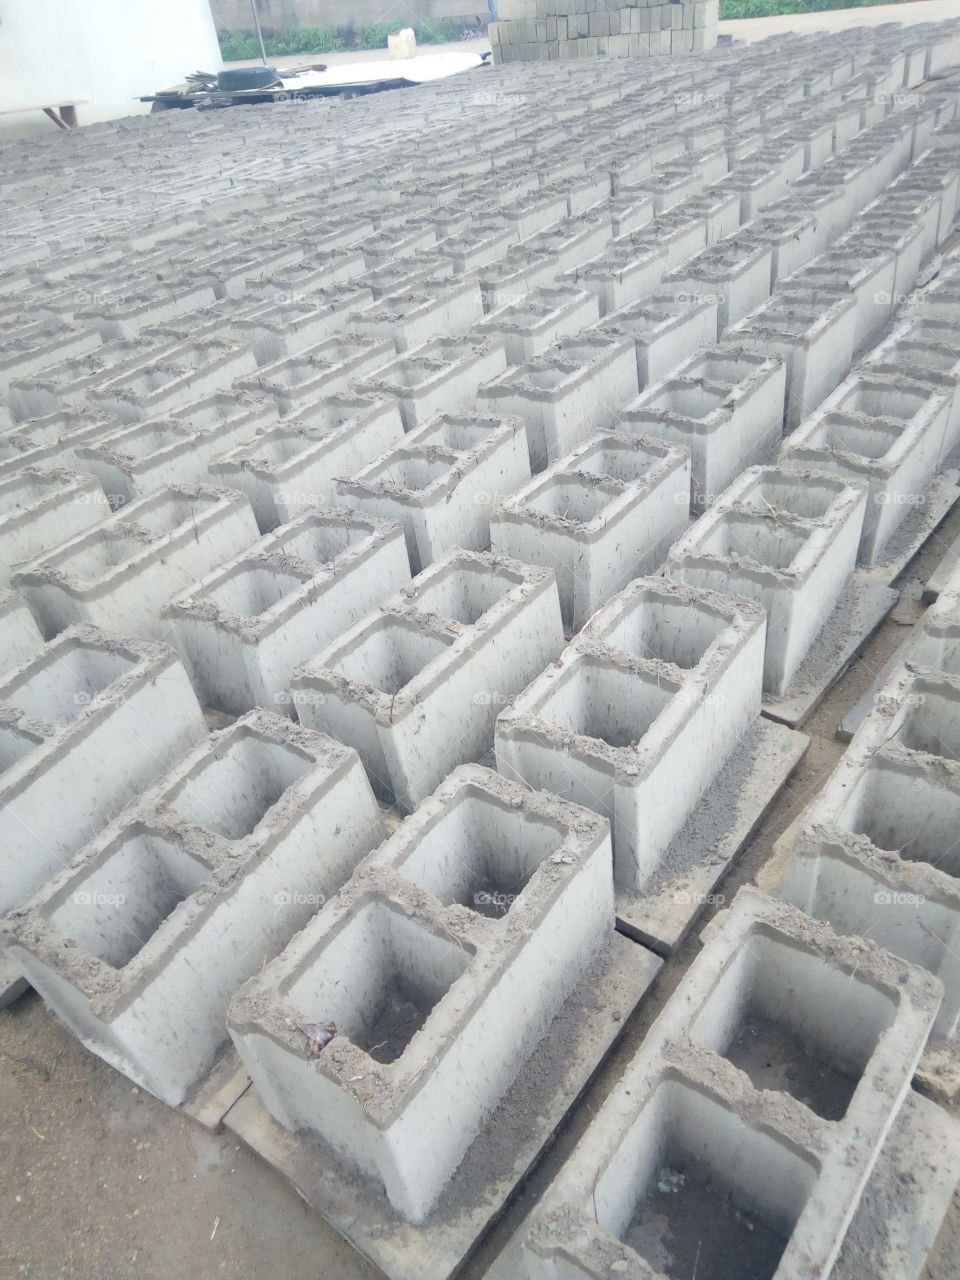 This is why a block moulding industry is a venture that yields good profit as there is an increasing demand for cement blocks from individuals, the government, companies, multi-national contractors, etc, for building purposes.